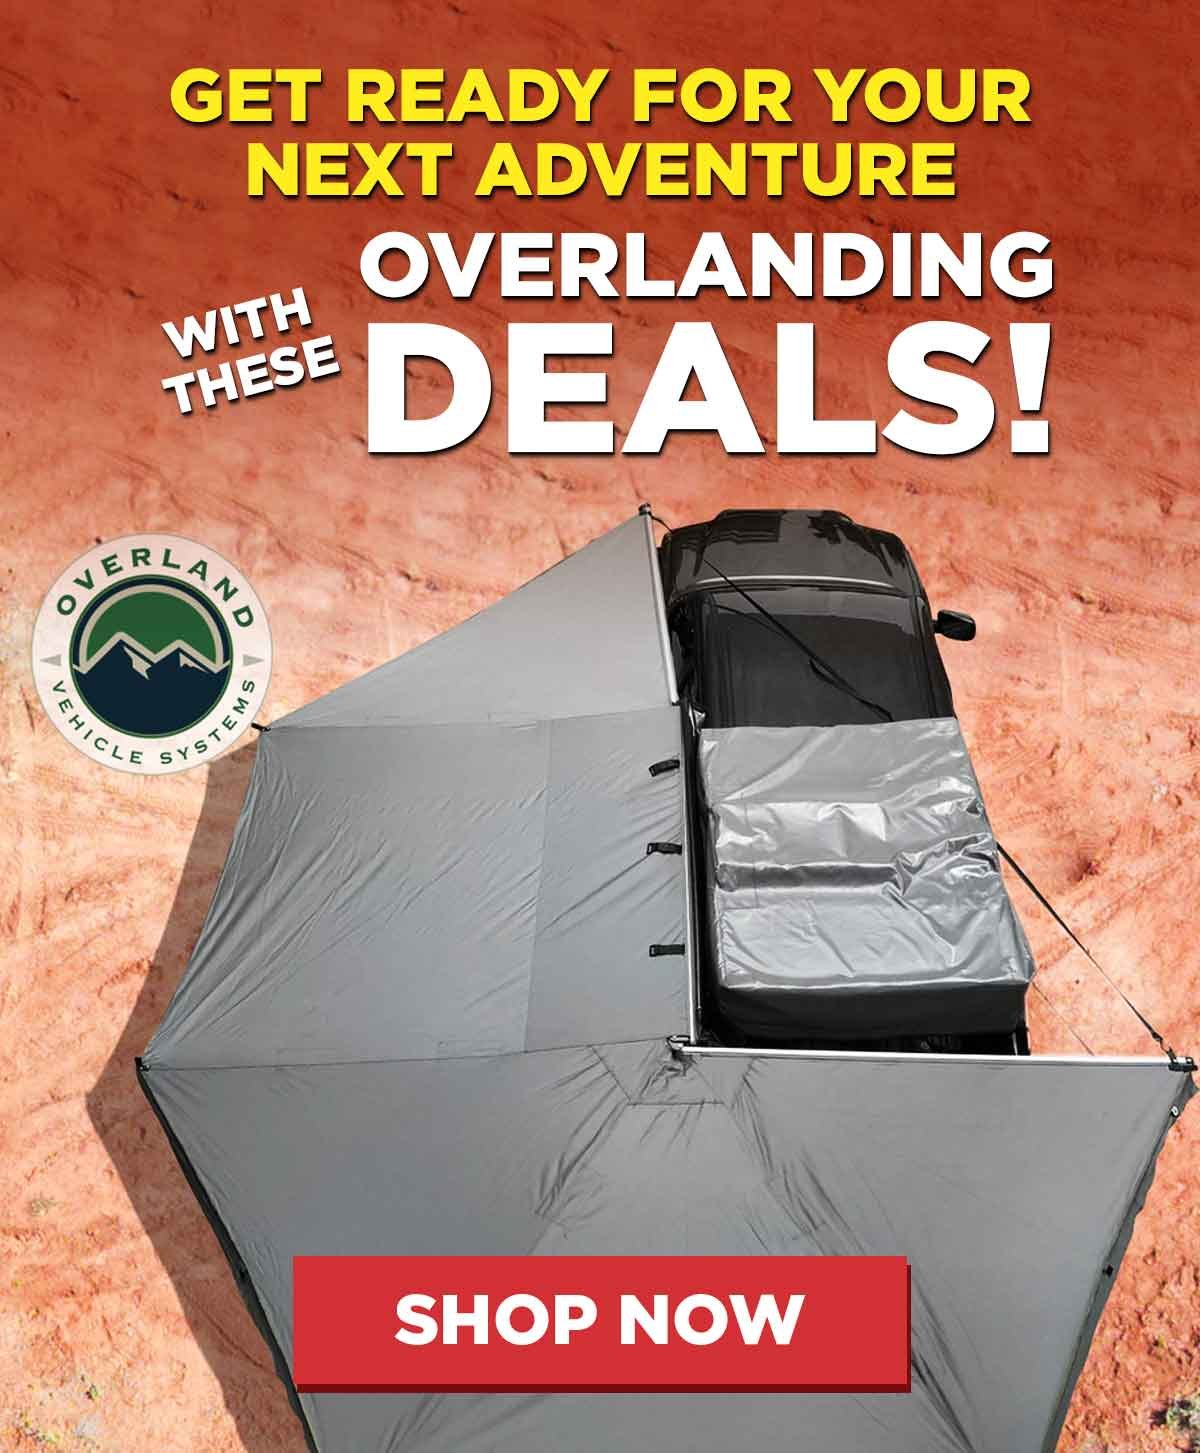 Get Ready For Your Next Adventure With These Overlanding Deals!